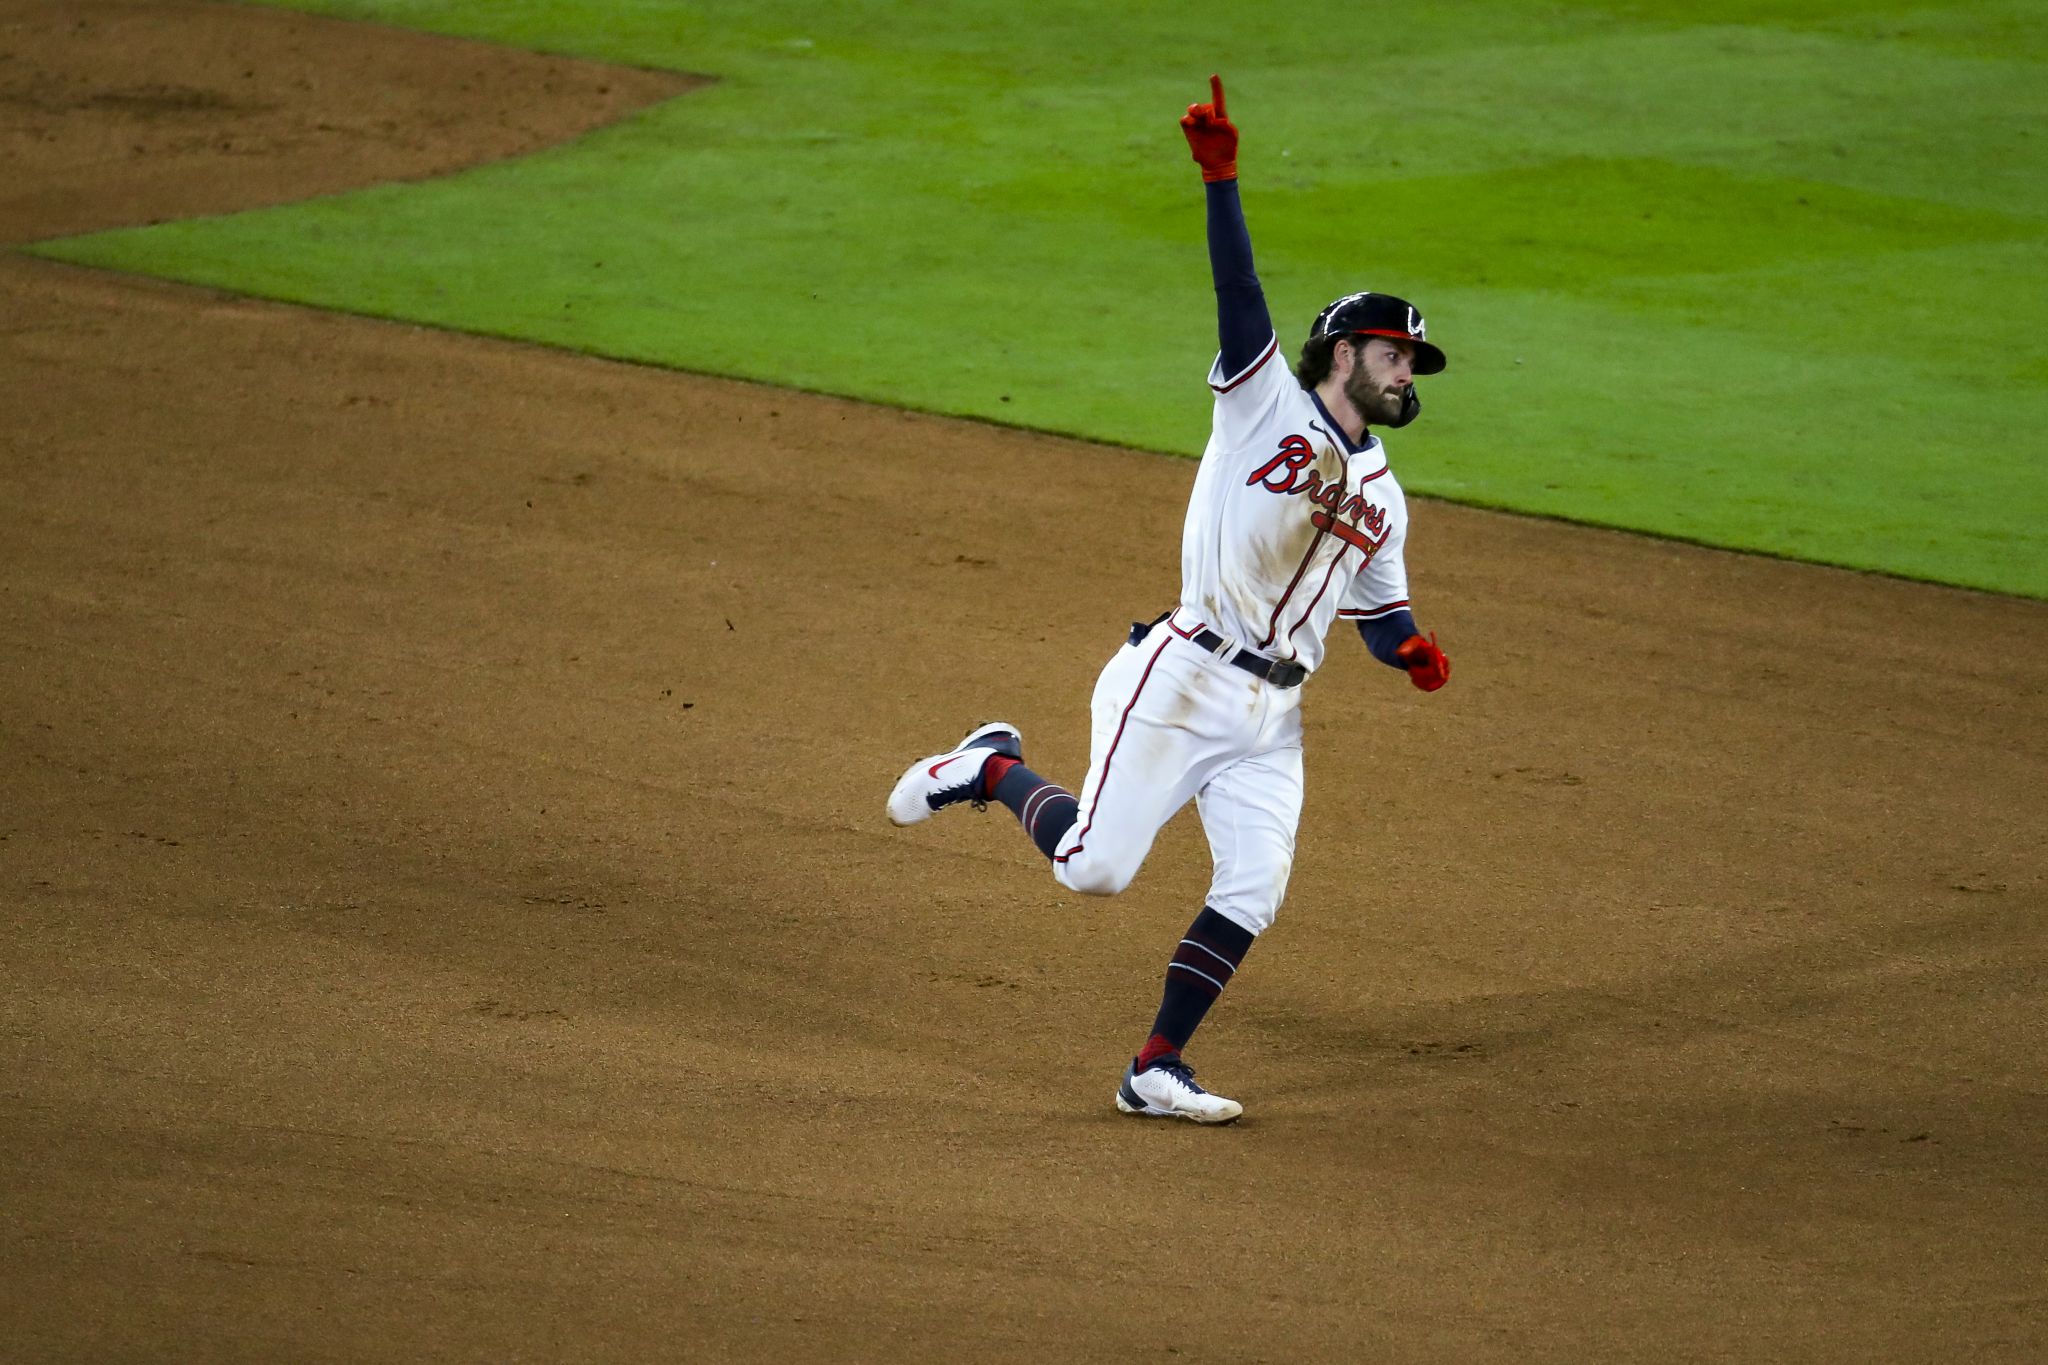 Dansby Swanson finally has game-changing moment as Braves move